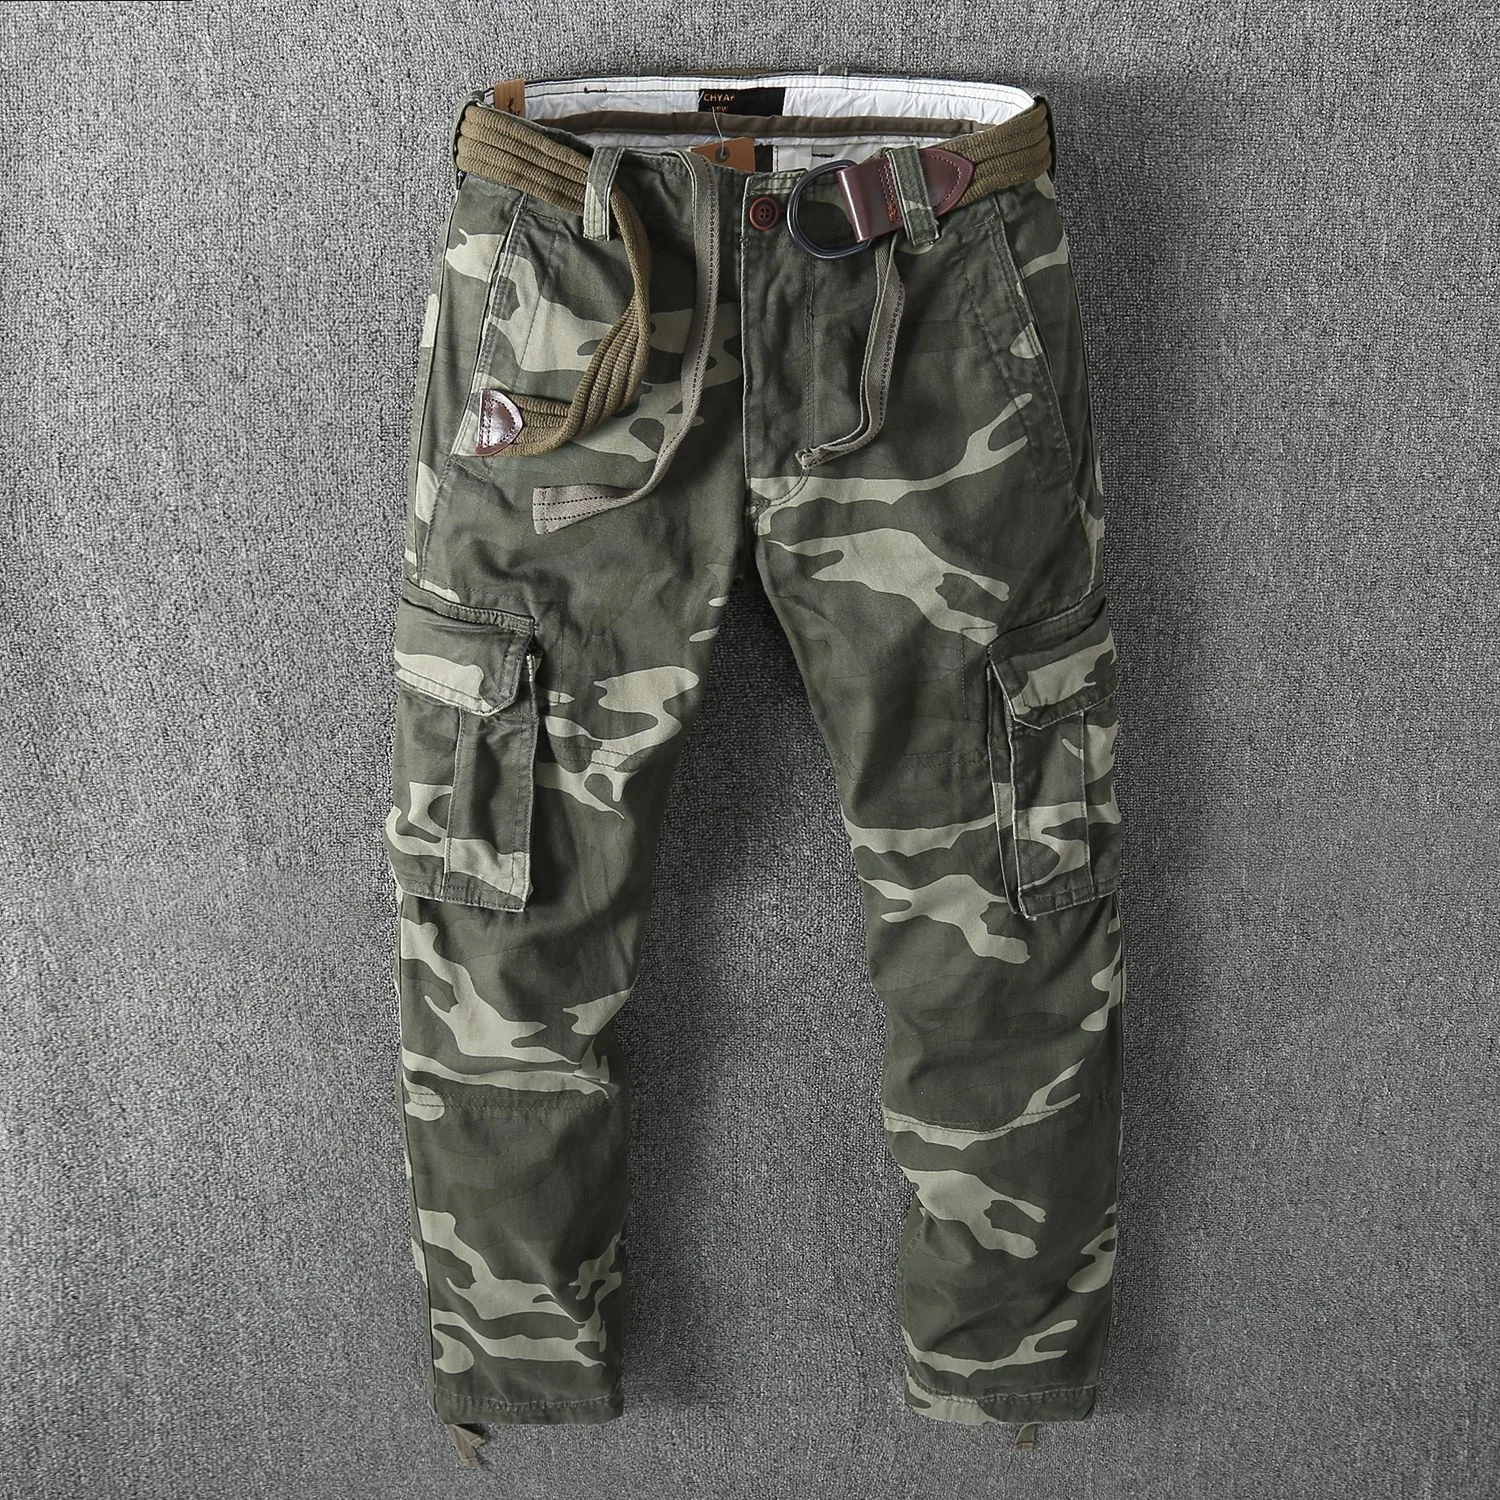 

Men's Autumn Casual Pants with Belt Safari Style Camouflage Multi-Pockets Cargo Fashion Overalls Tooling Trousers